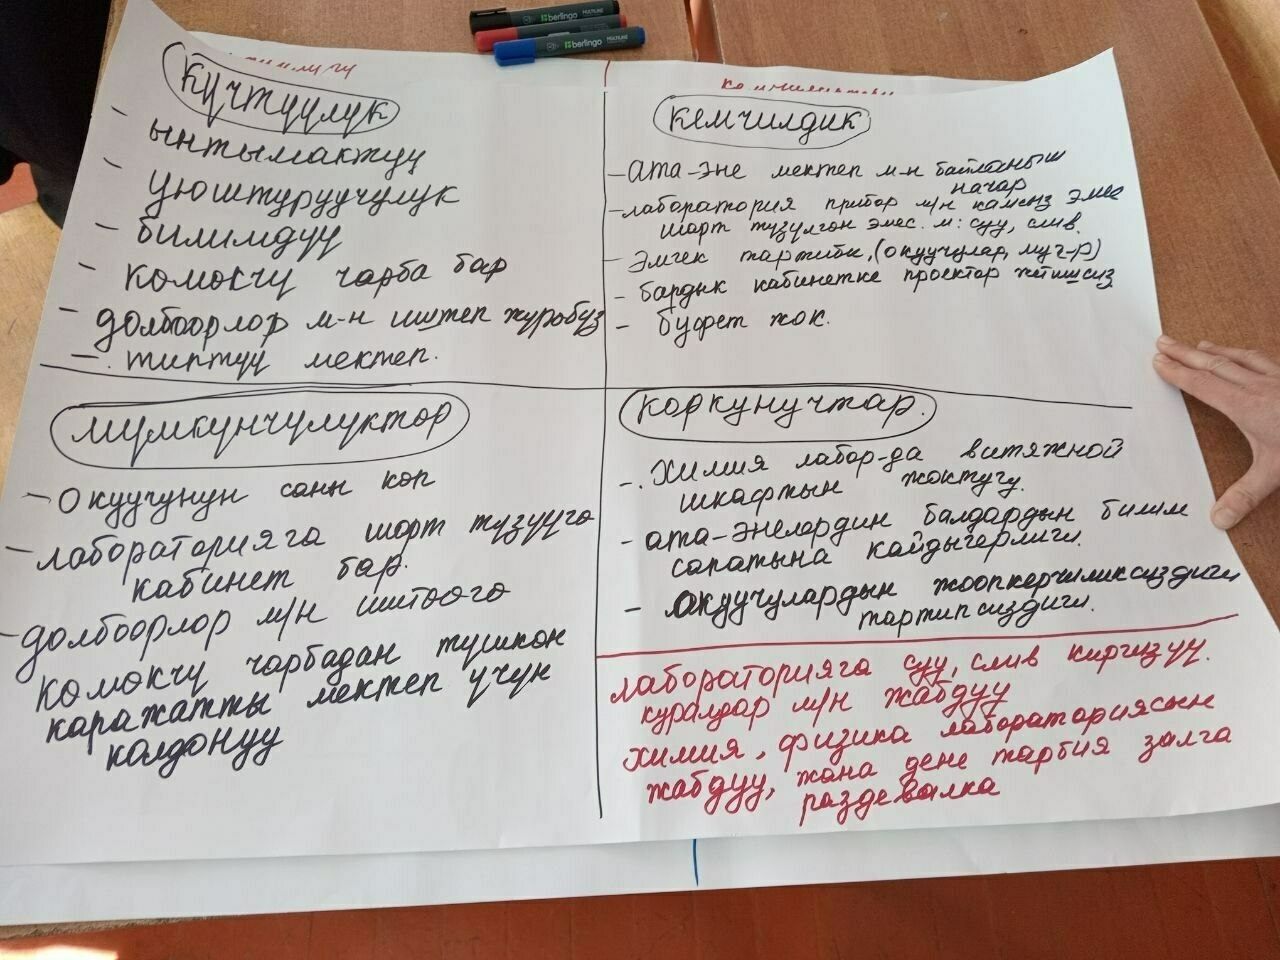 piece of flipchart paper in landscape orientation divided into four sections, one for each letter of SWOT, and with black and red cursive marker writing